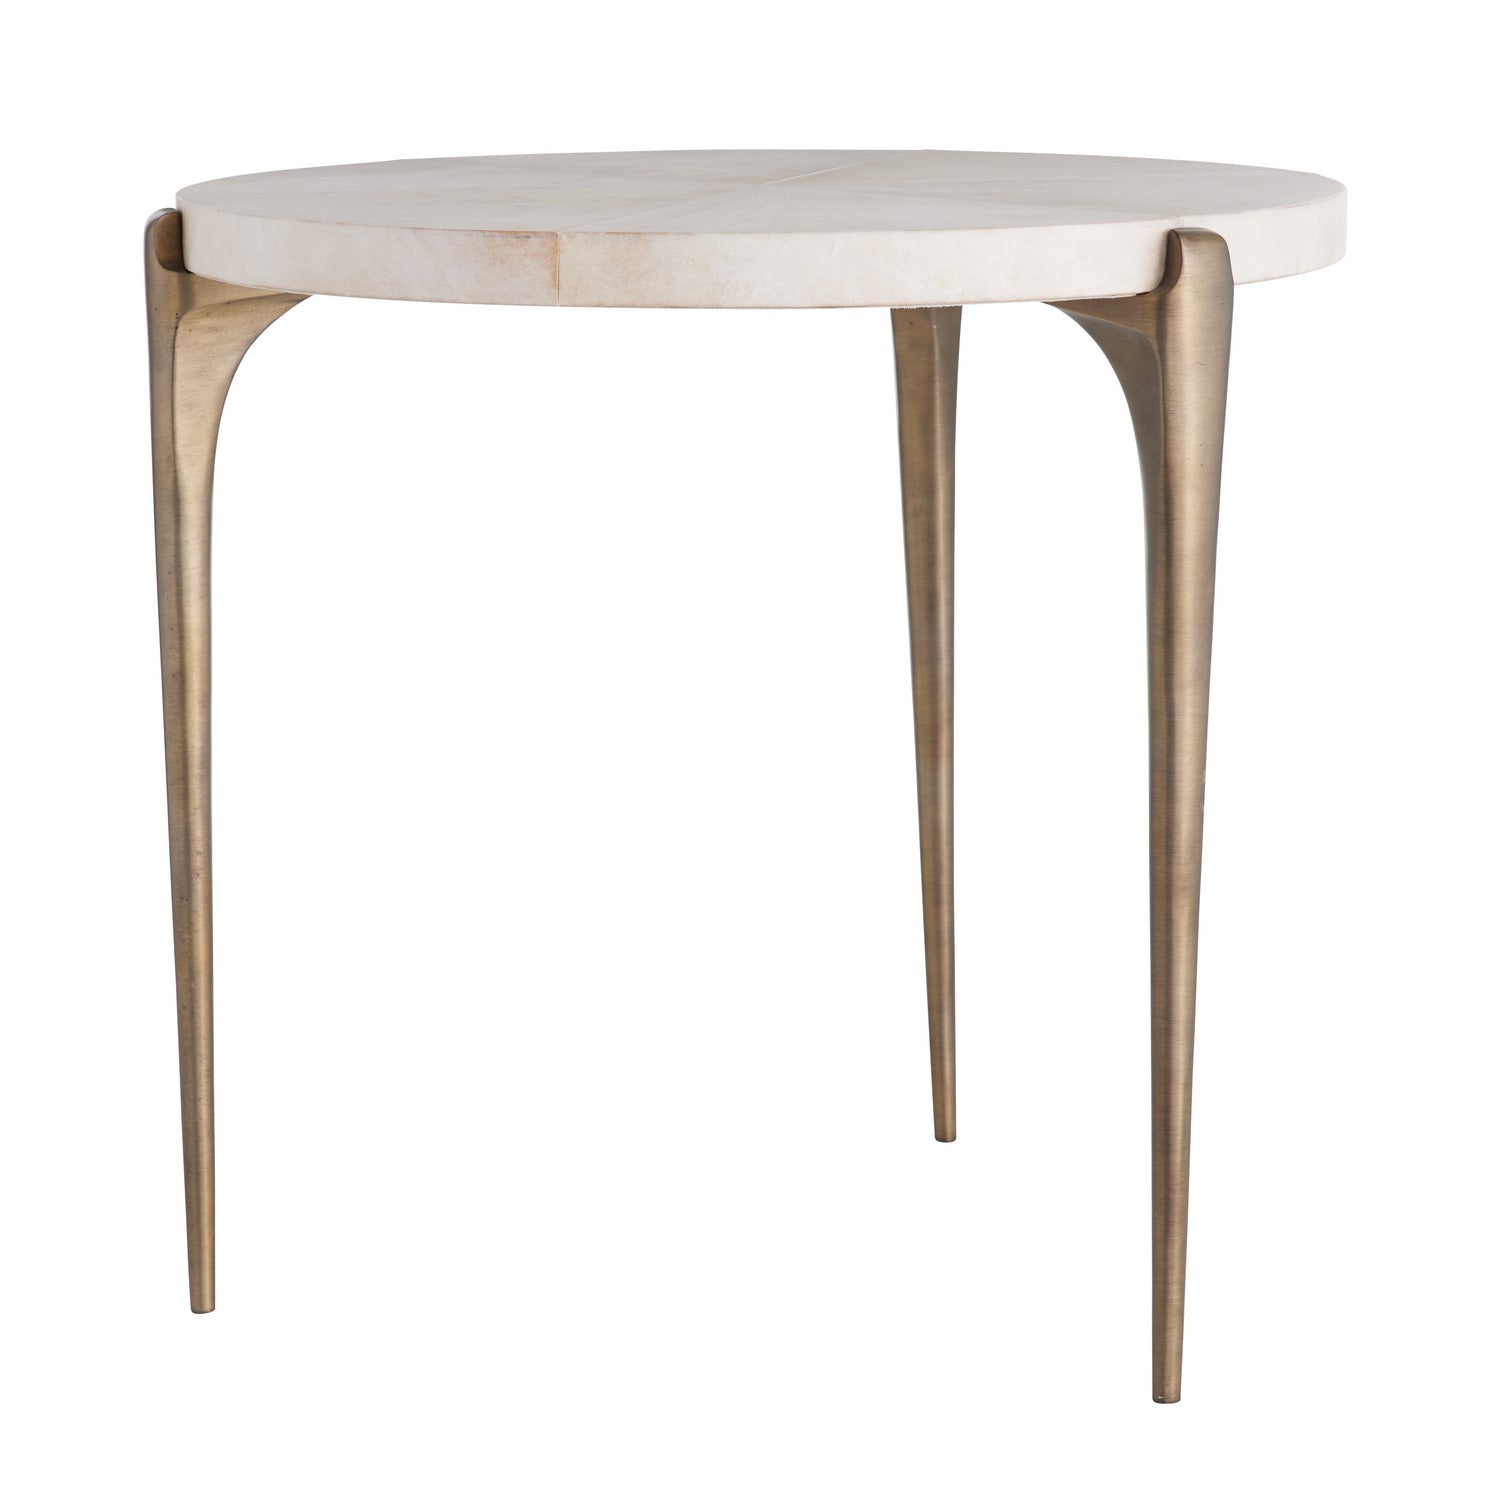 Side Table from the June collection in Natural finish